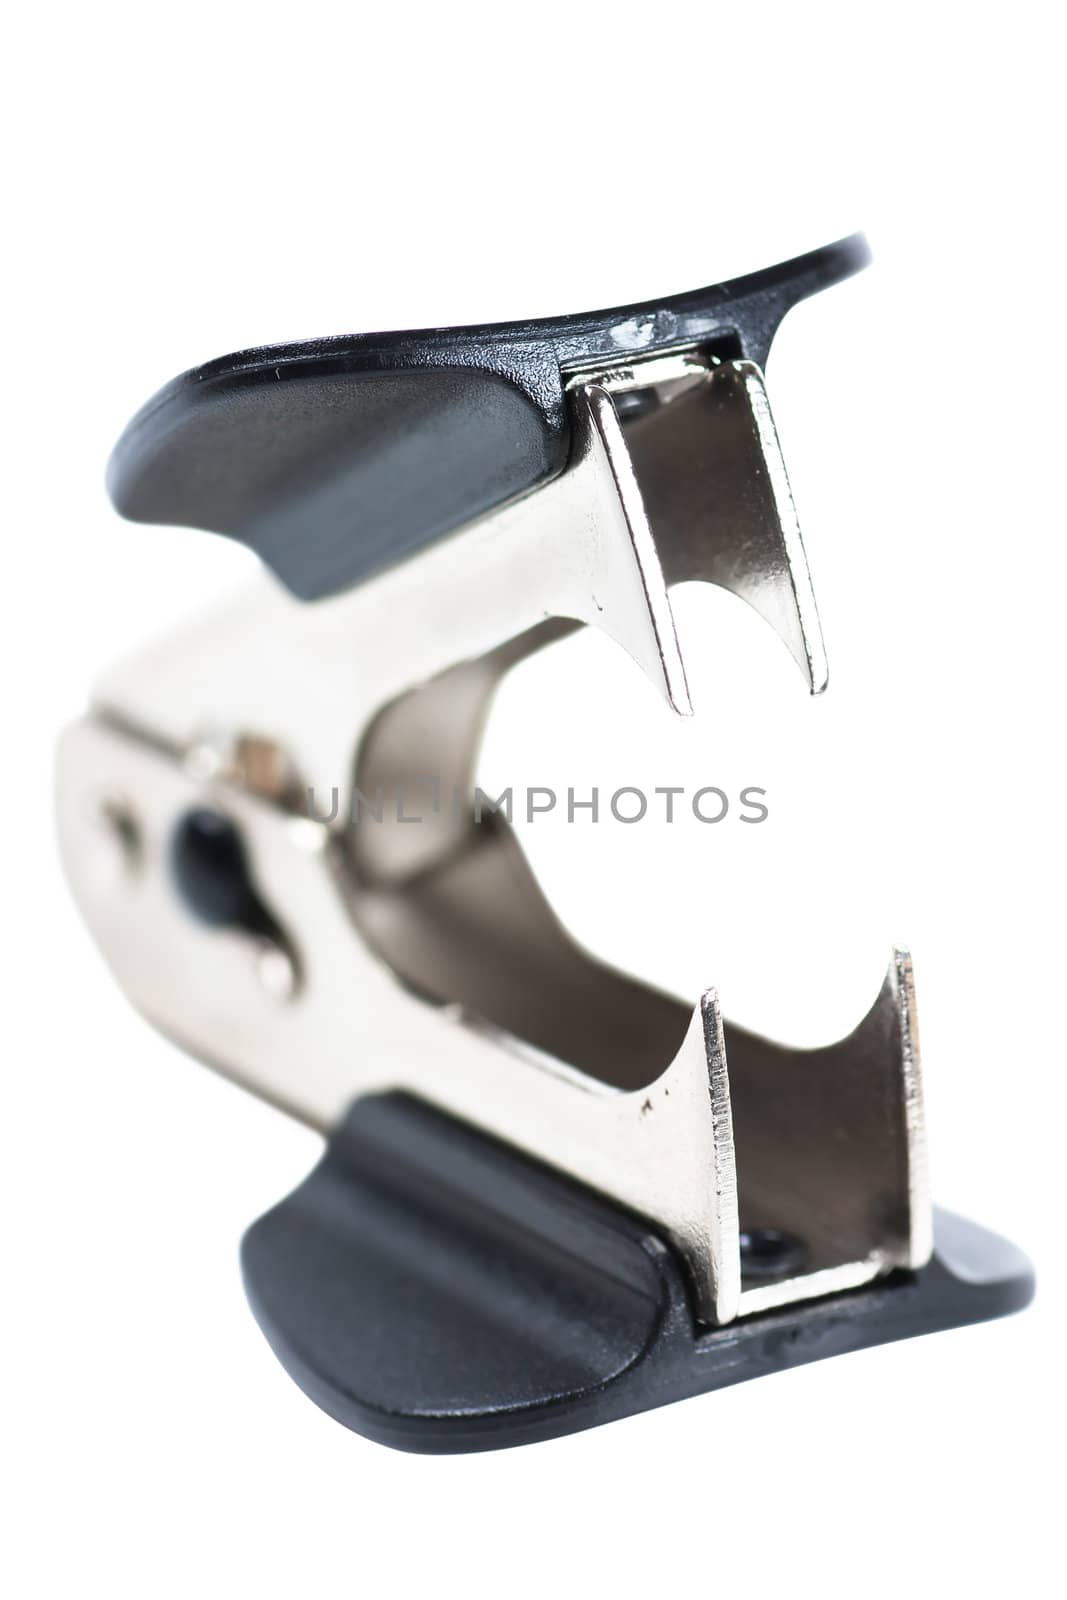 Close-up view of staple remover isolated over white background